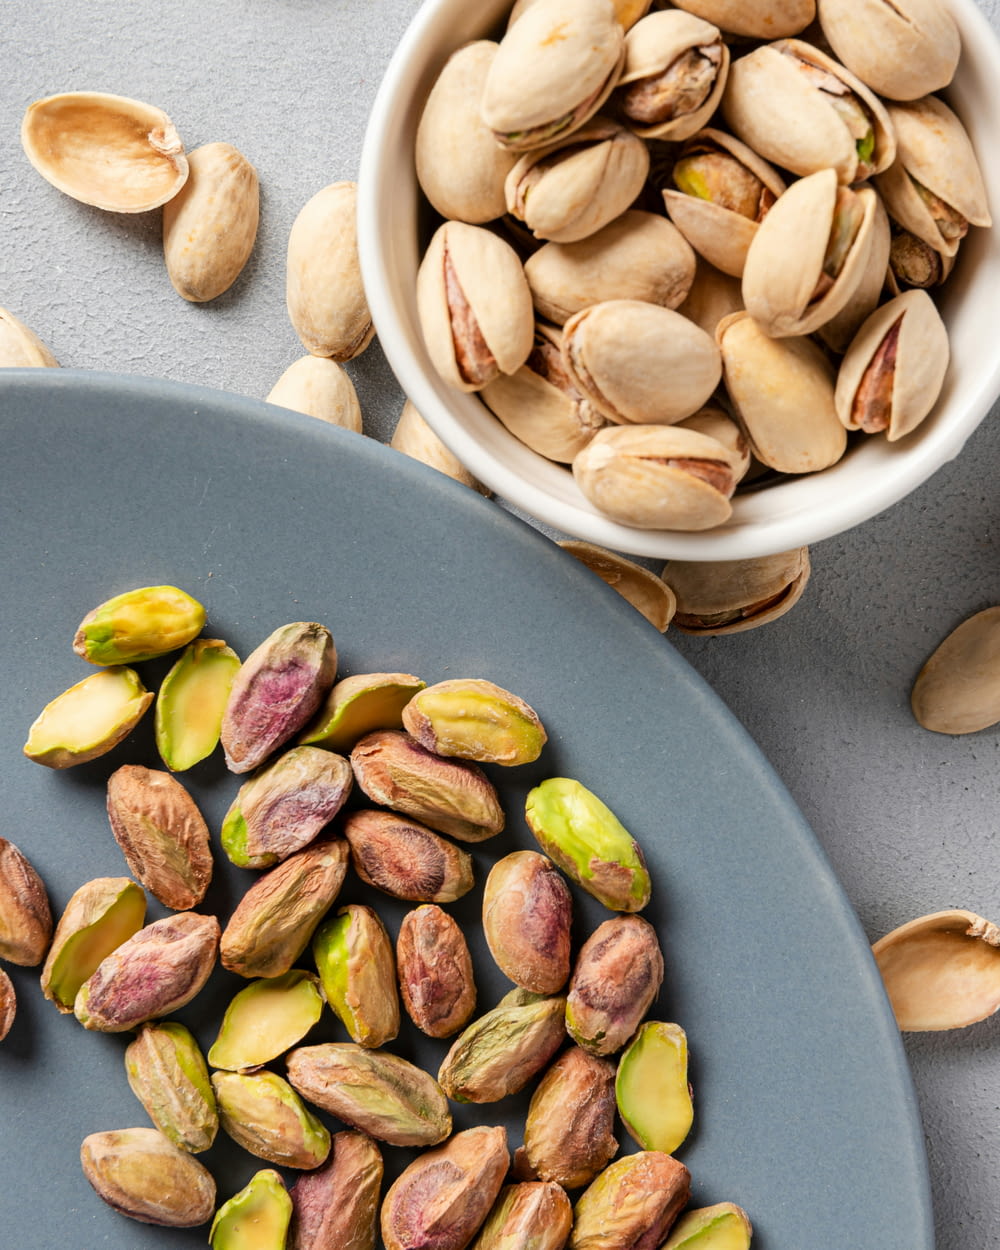 a bowl of pistachio nuts next to a plate of pistachio nuts